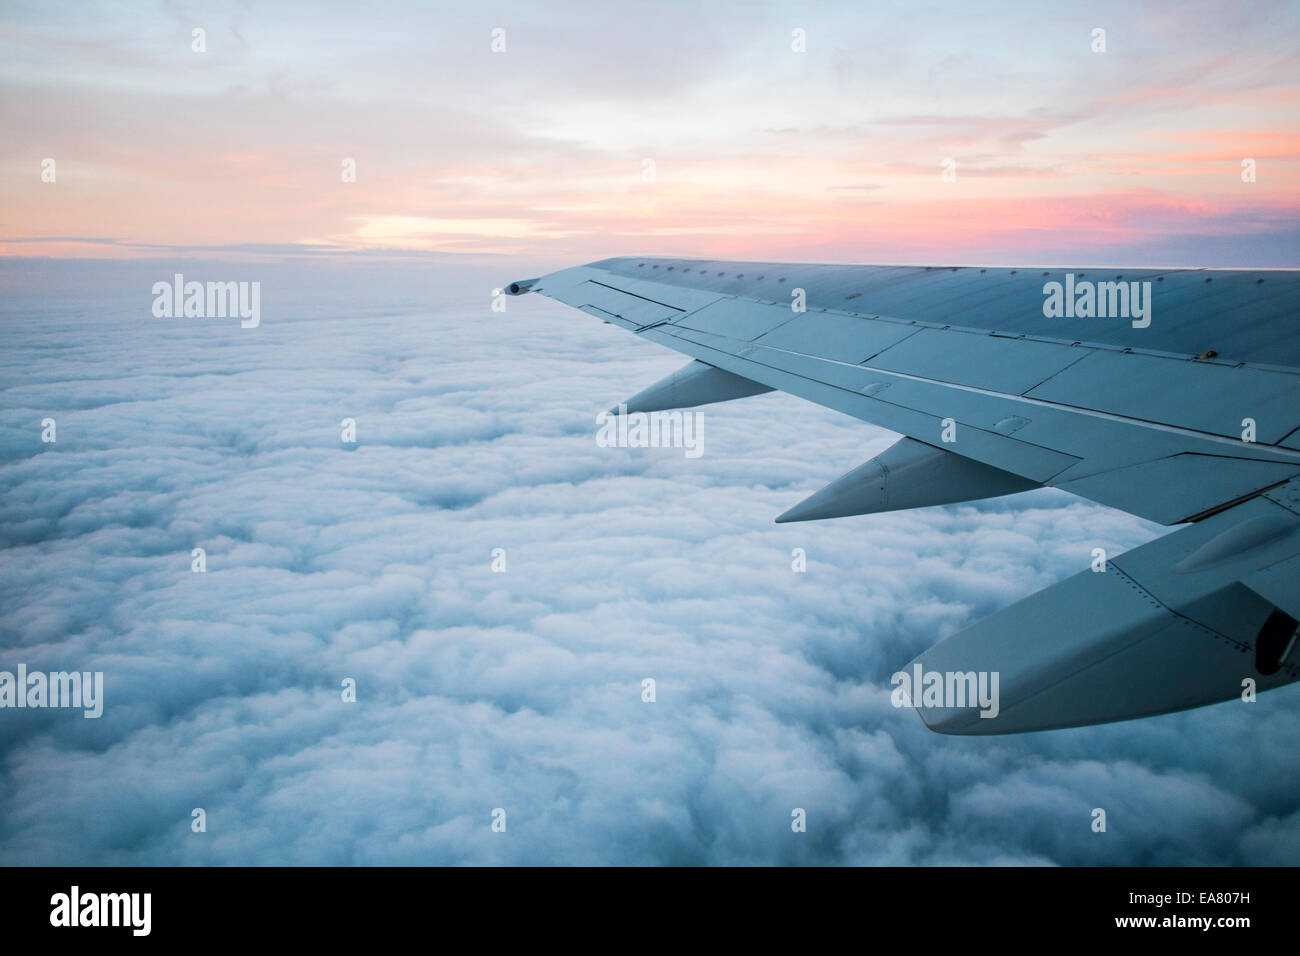 View from window seat, Airplane flying above clouds Stock Photo